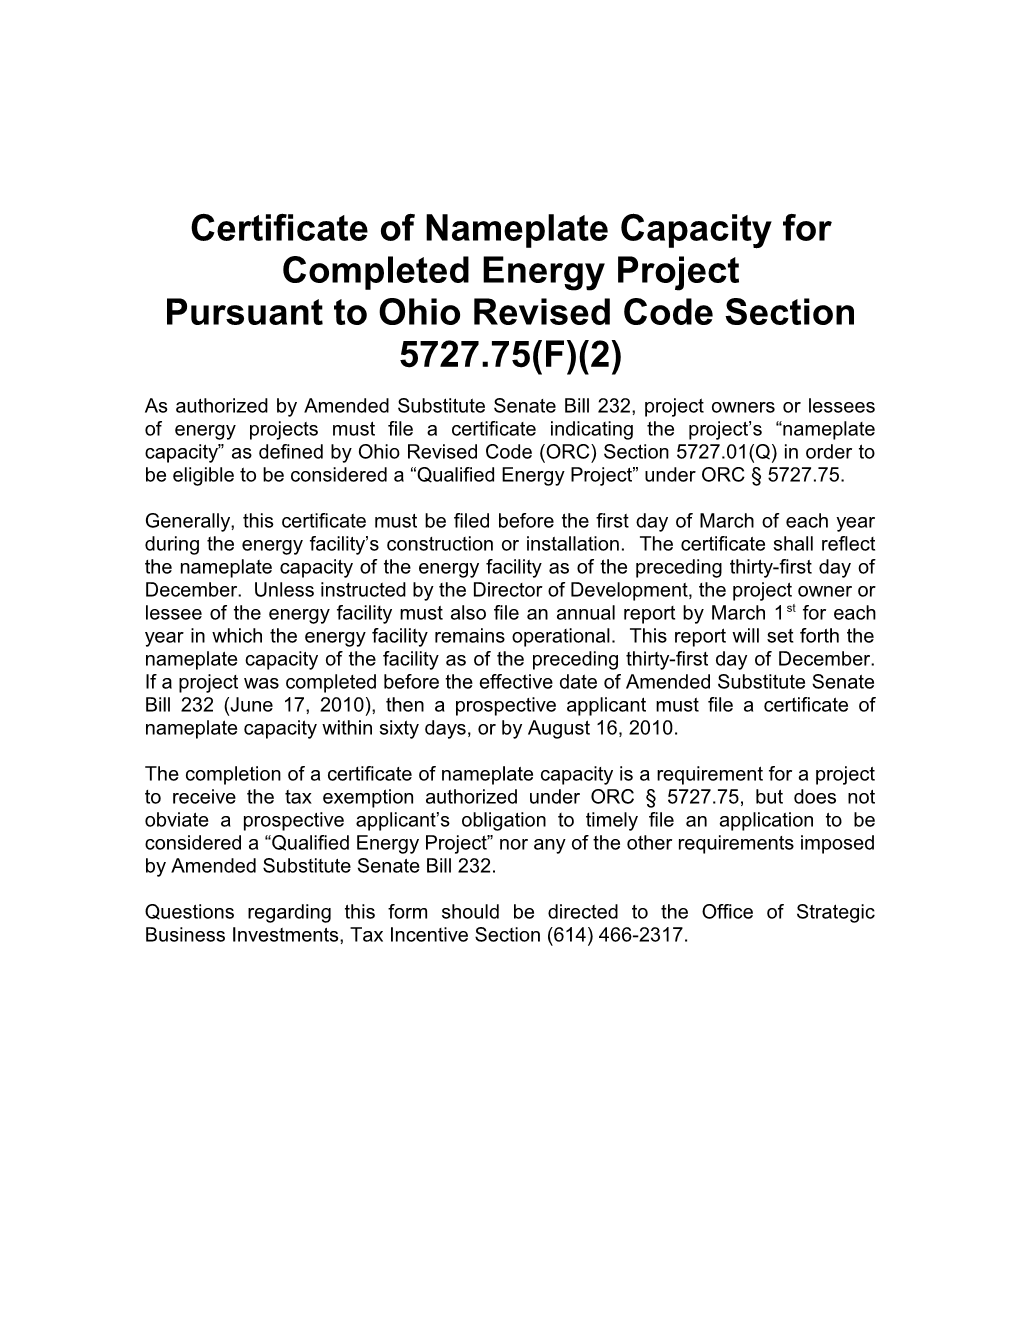 Certificate of Nameplate Capacity for Completed Energy Project